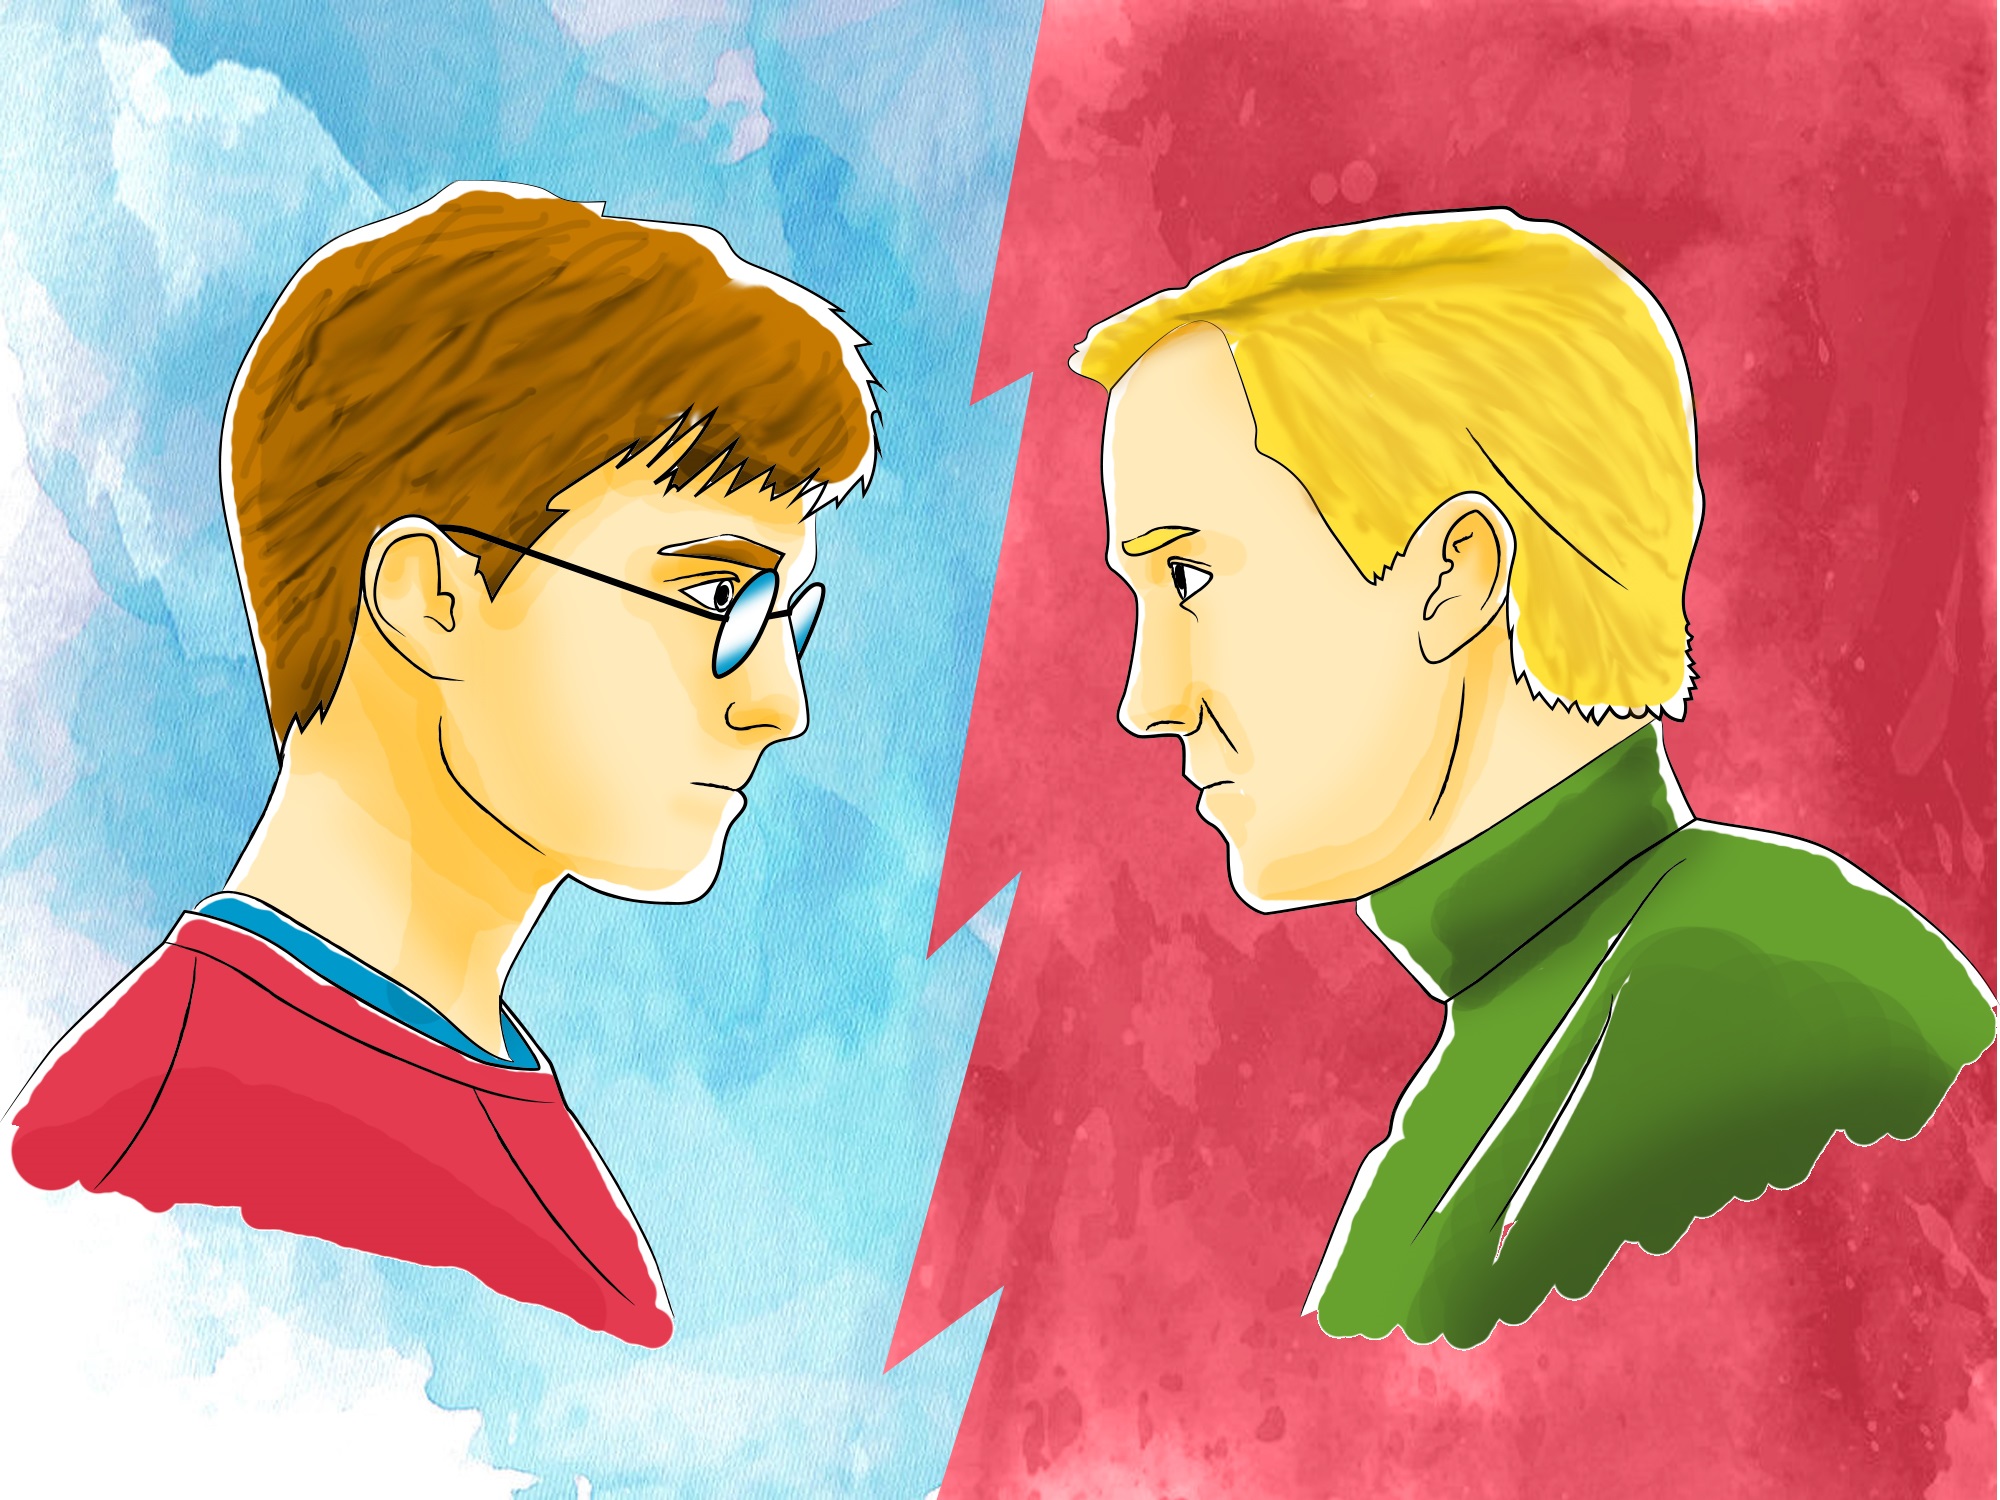 The clash of Harry Potter and Draco Malfoy as an example of foil characters.